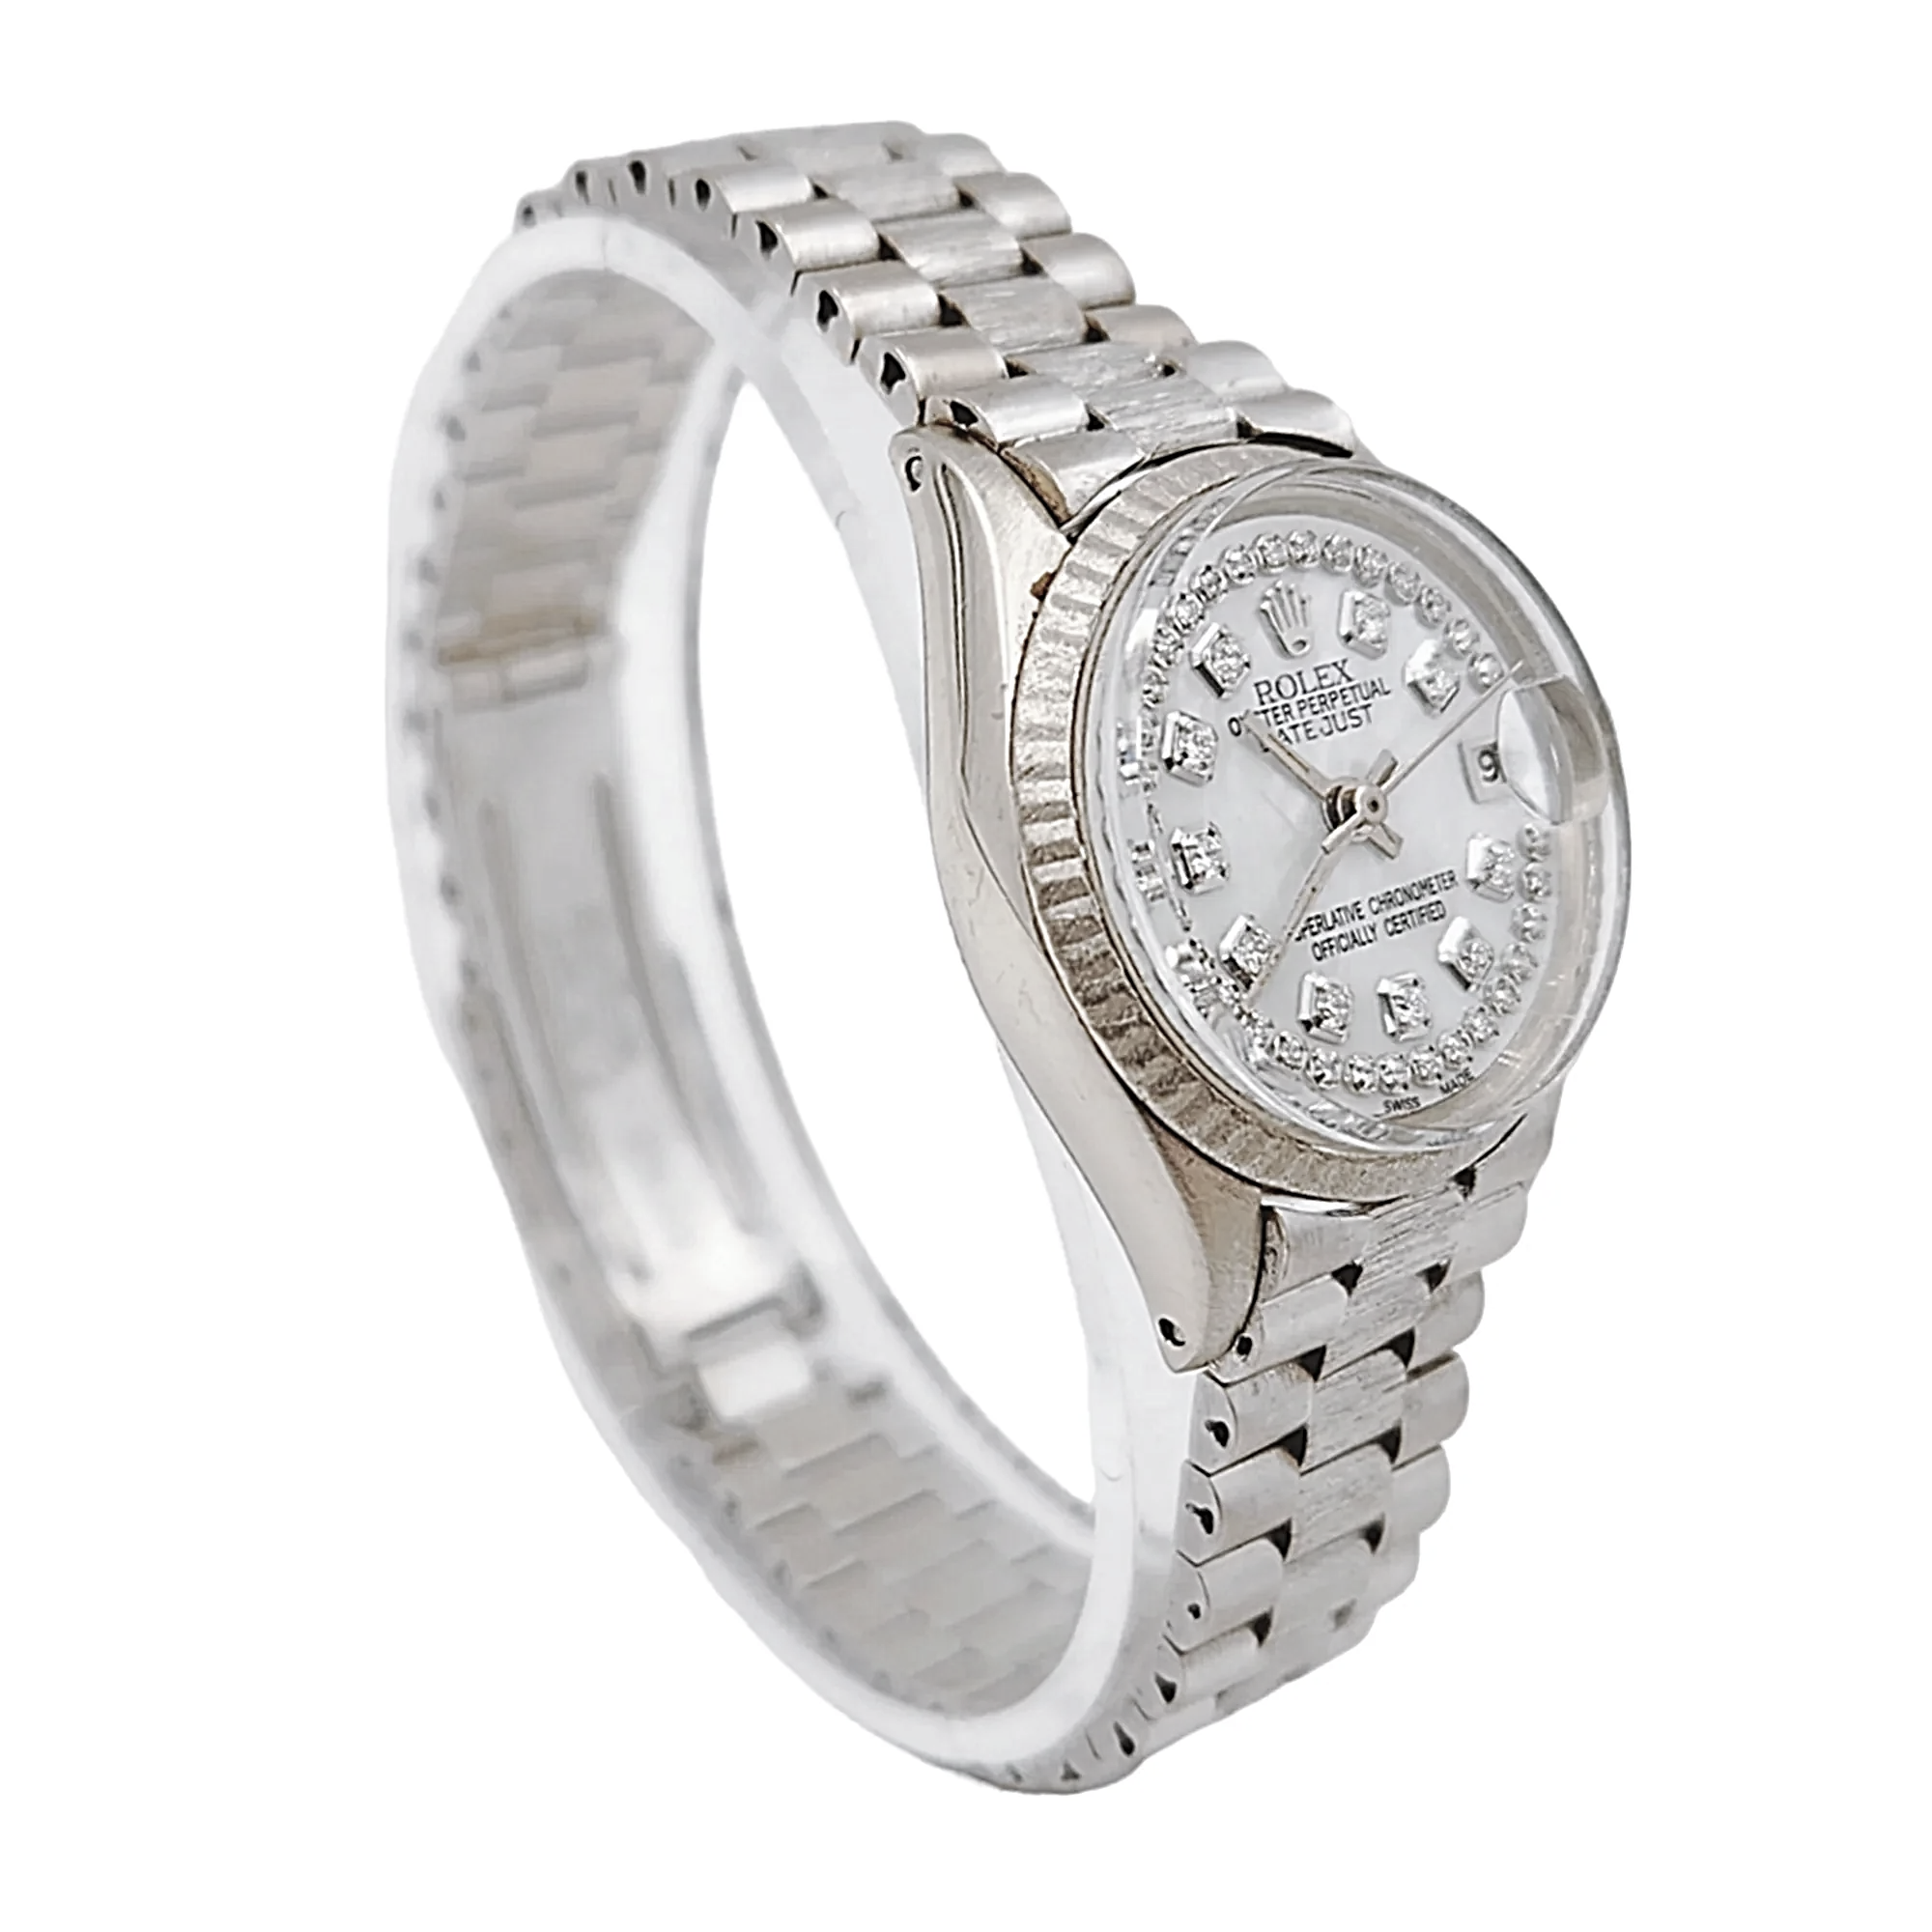 1967 Ladies Rolex 24mm Vintage Bark Finish Solid 18K White Gold Wristwatch w/ Mother of Pearl Diamond Dial. (Pre-Owned 6517)